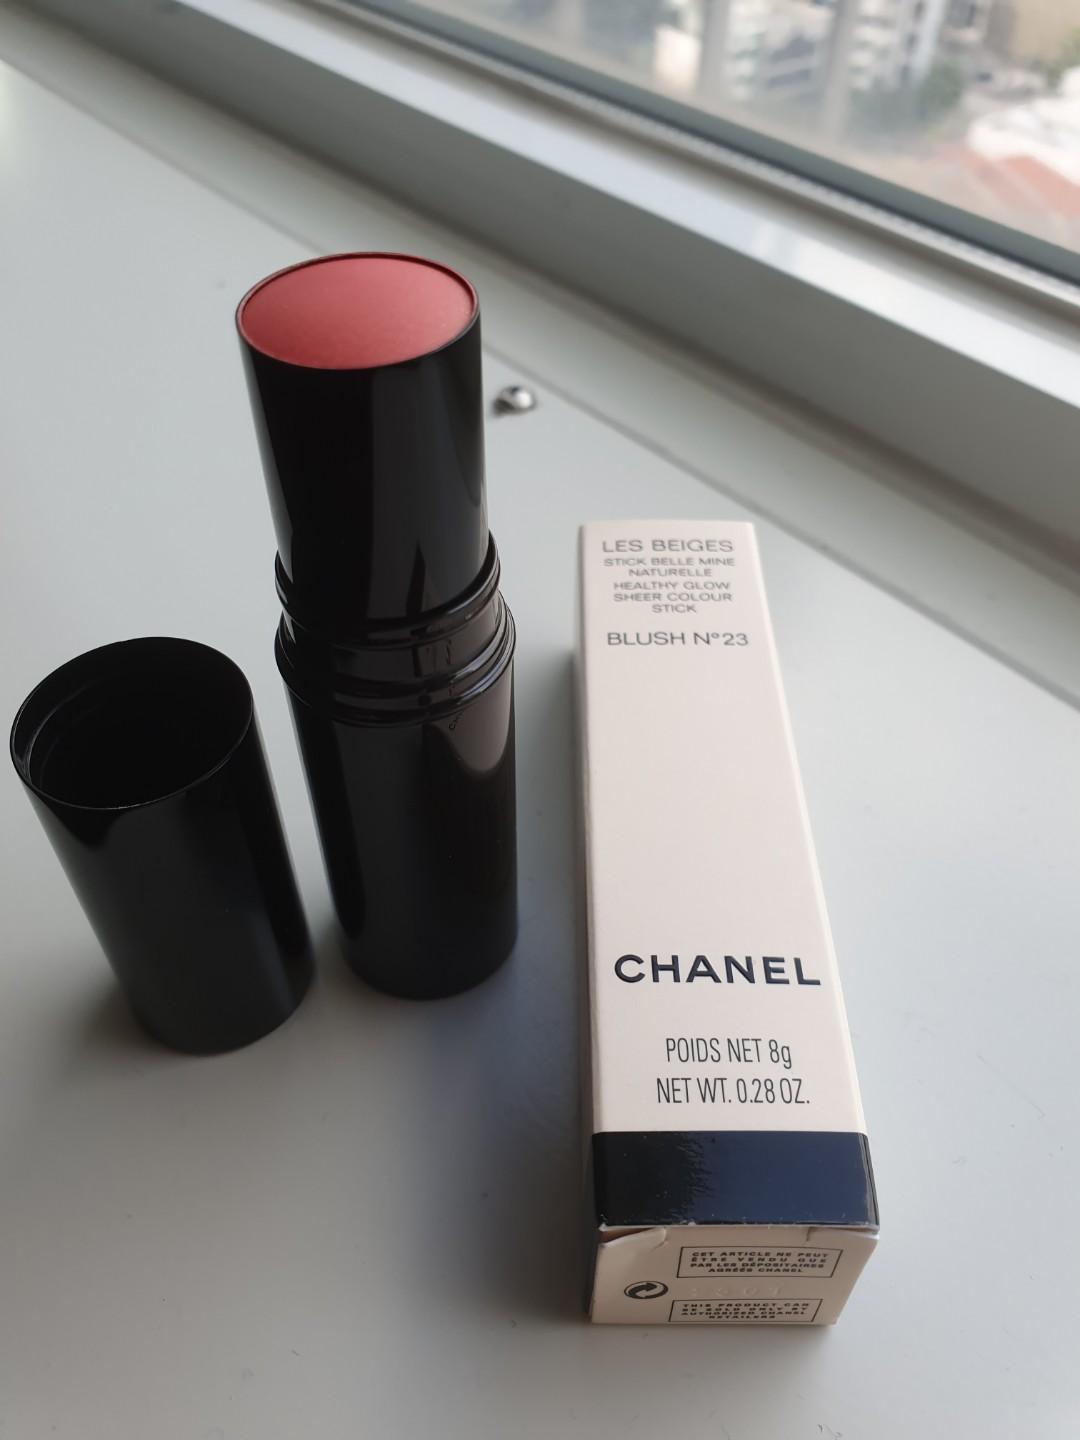 CHANEL LES BEIGES BLUSH STICK NO21 -- DEMO & SWATCHES -- CHANEL SHEER BLUSH.  